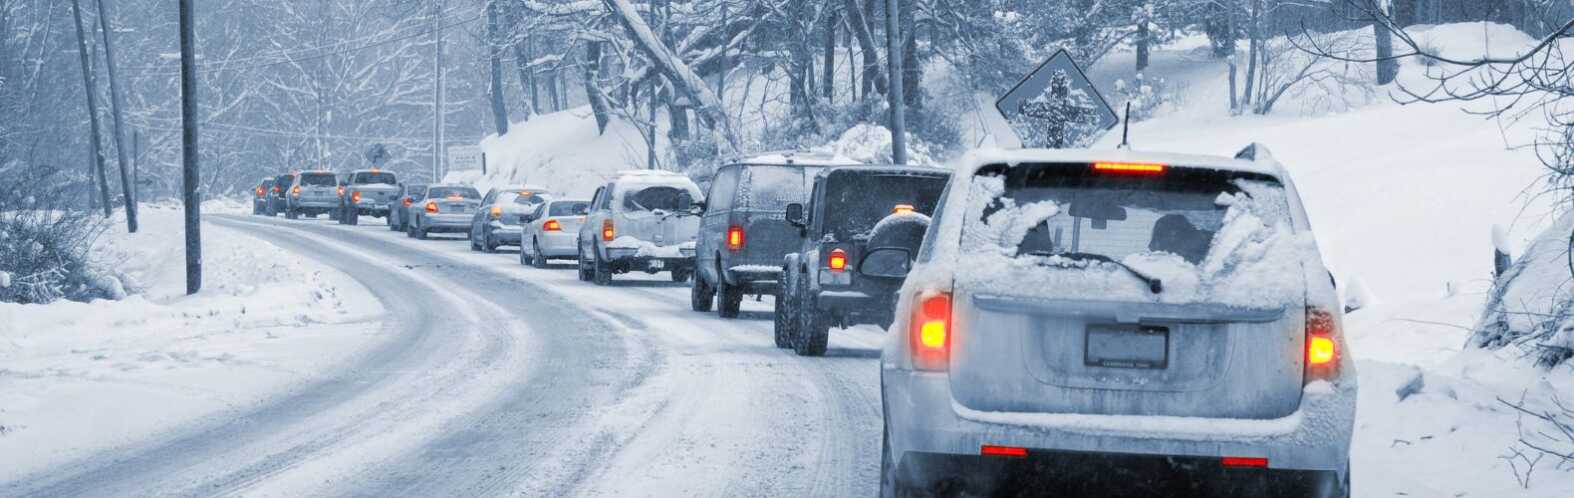 4 easy safe winter driving